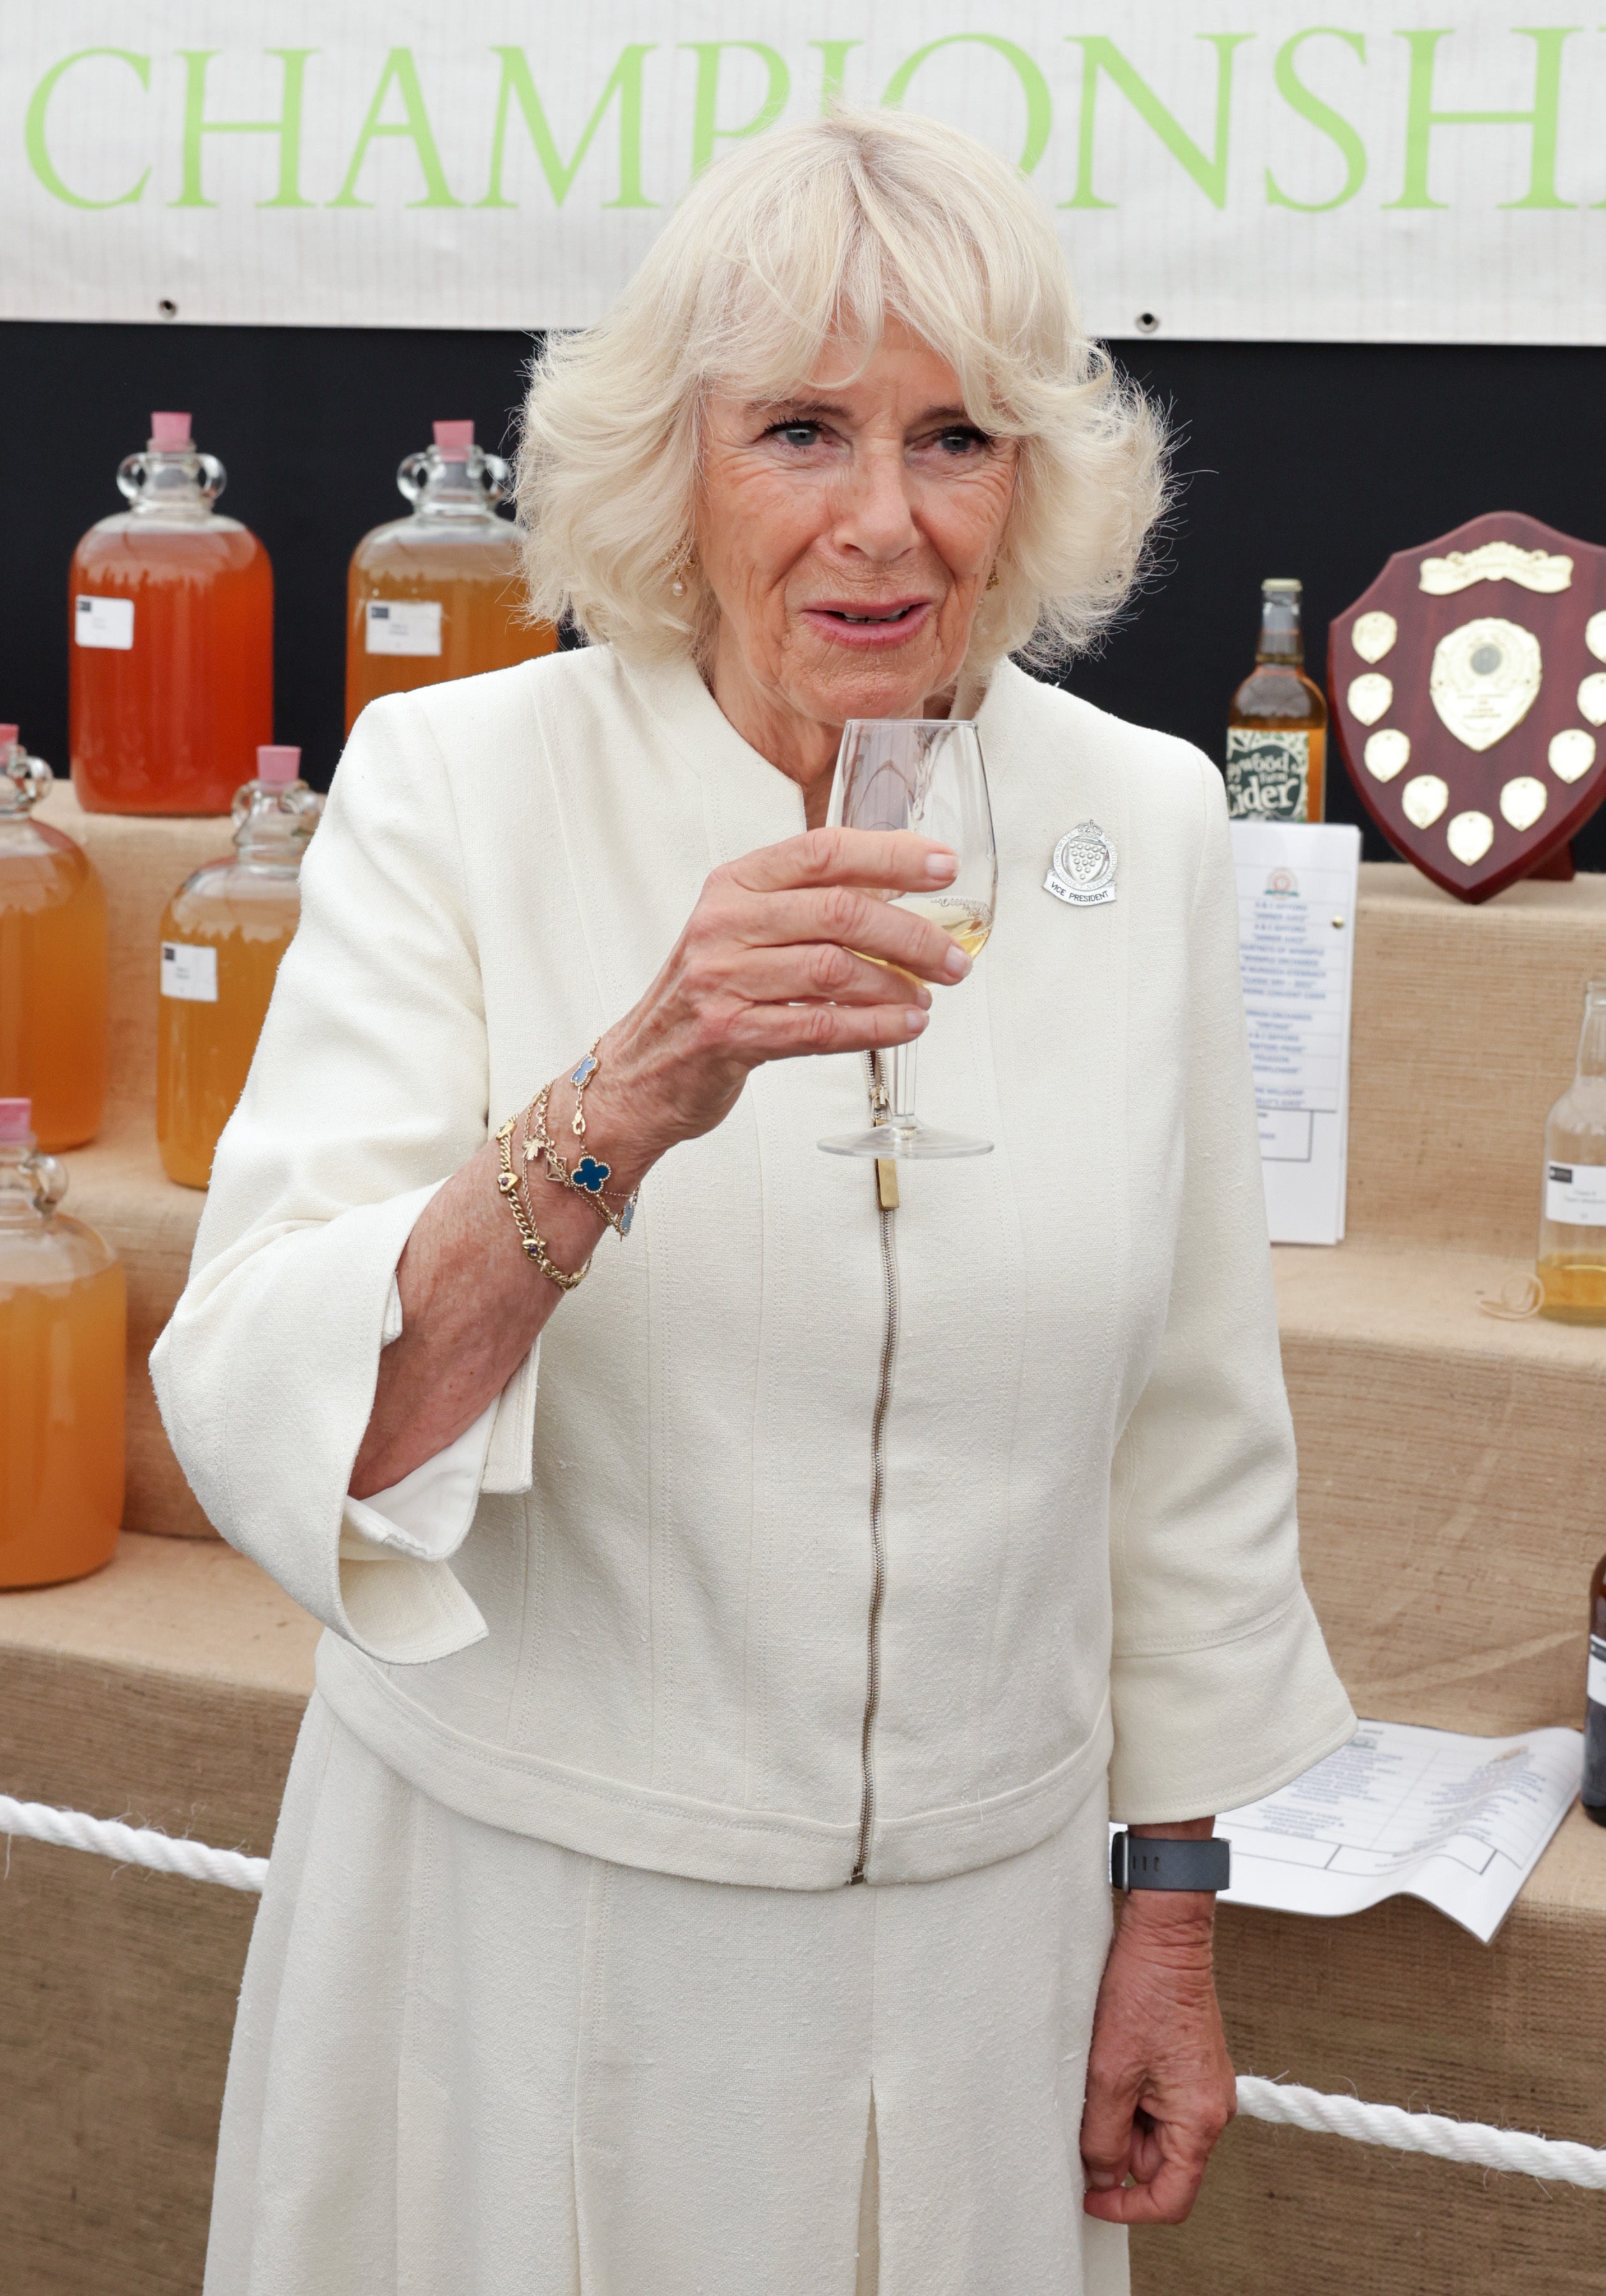 The Duchess of Cornwall described the sparkling cider as “smooth and refreshing” (PA)